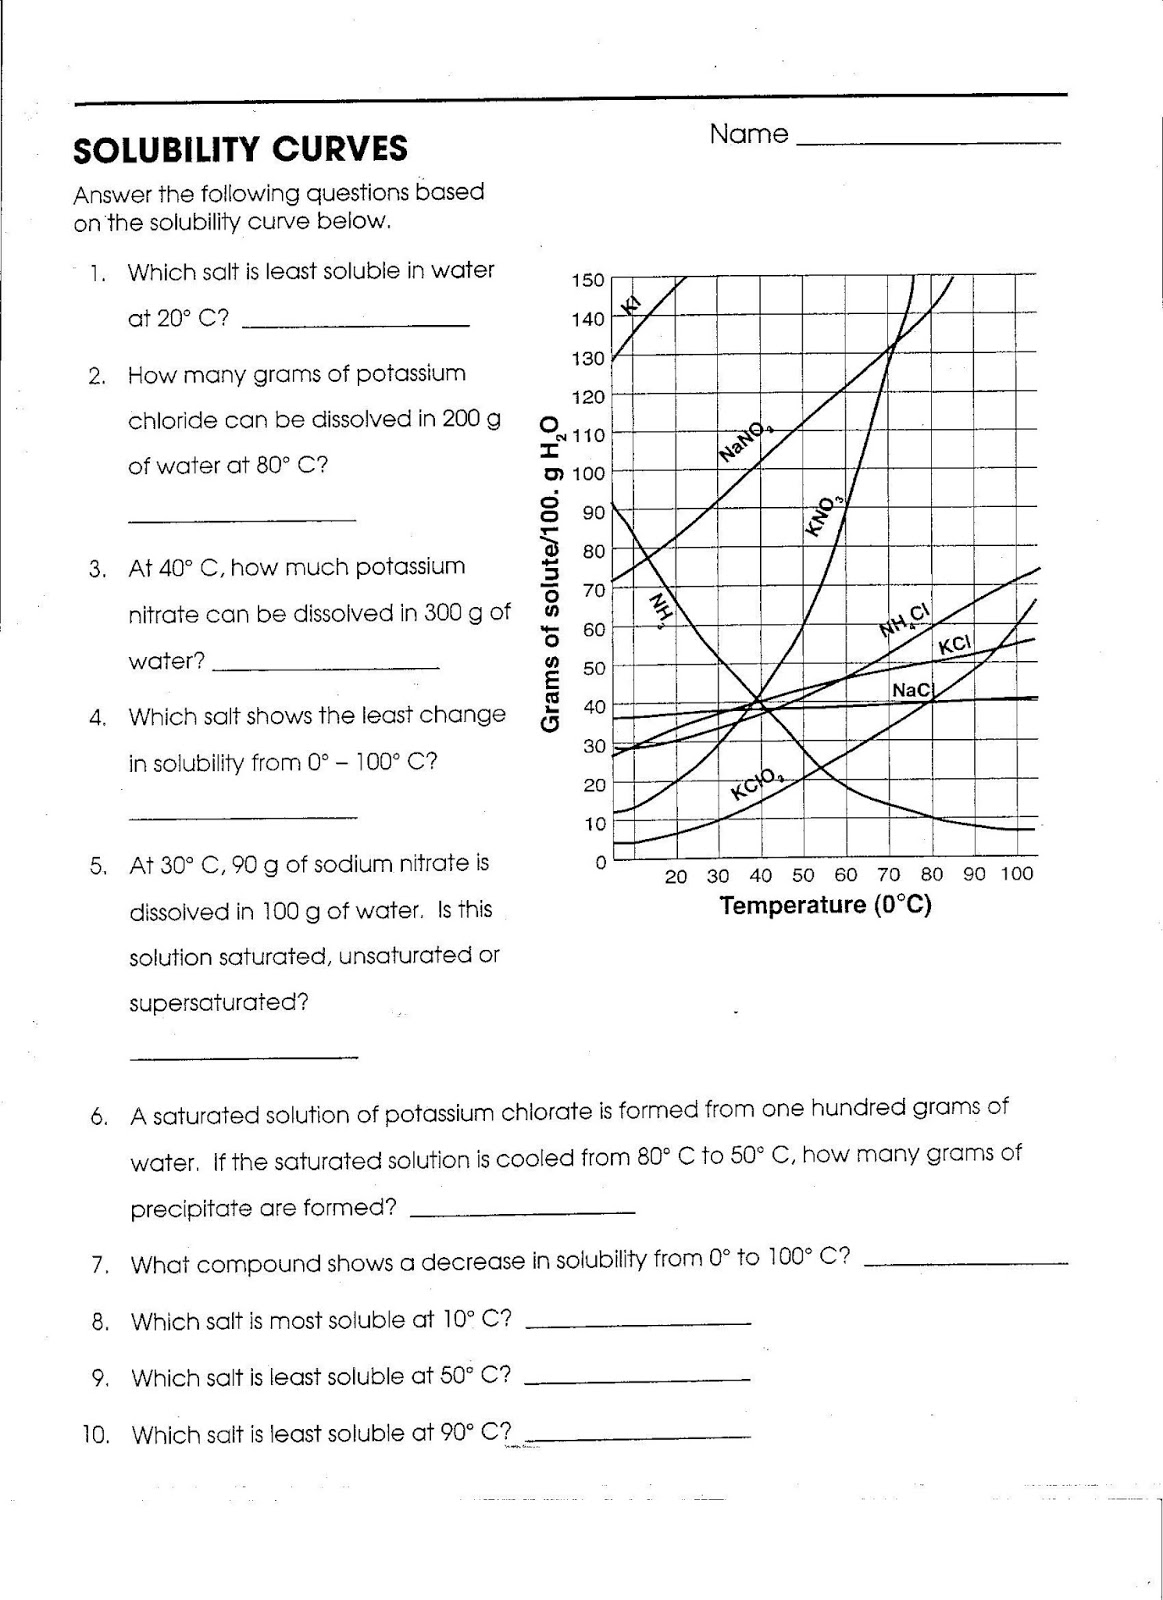 solubility curve worksheet - [PDF]Solubility curve worksheet Easy Peasy All in One High School